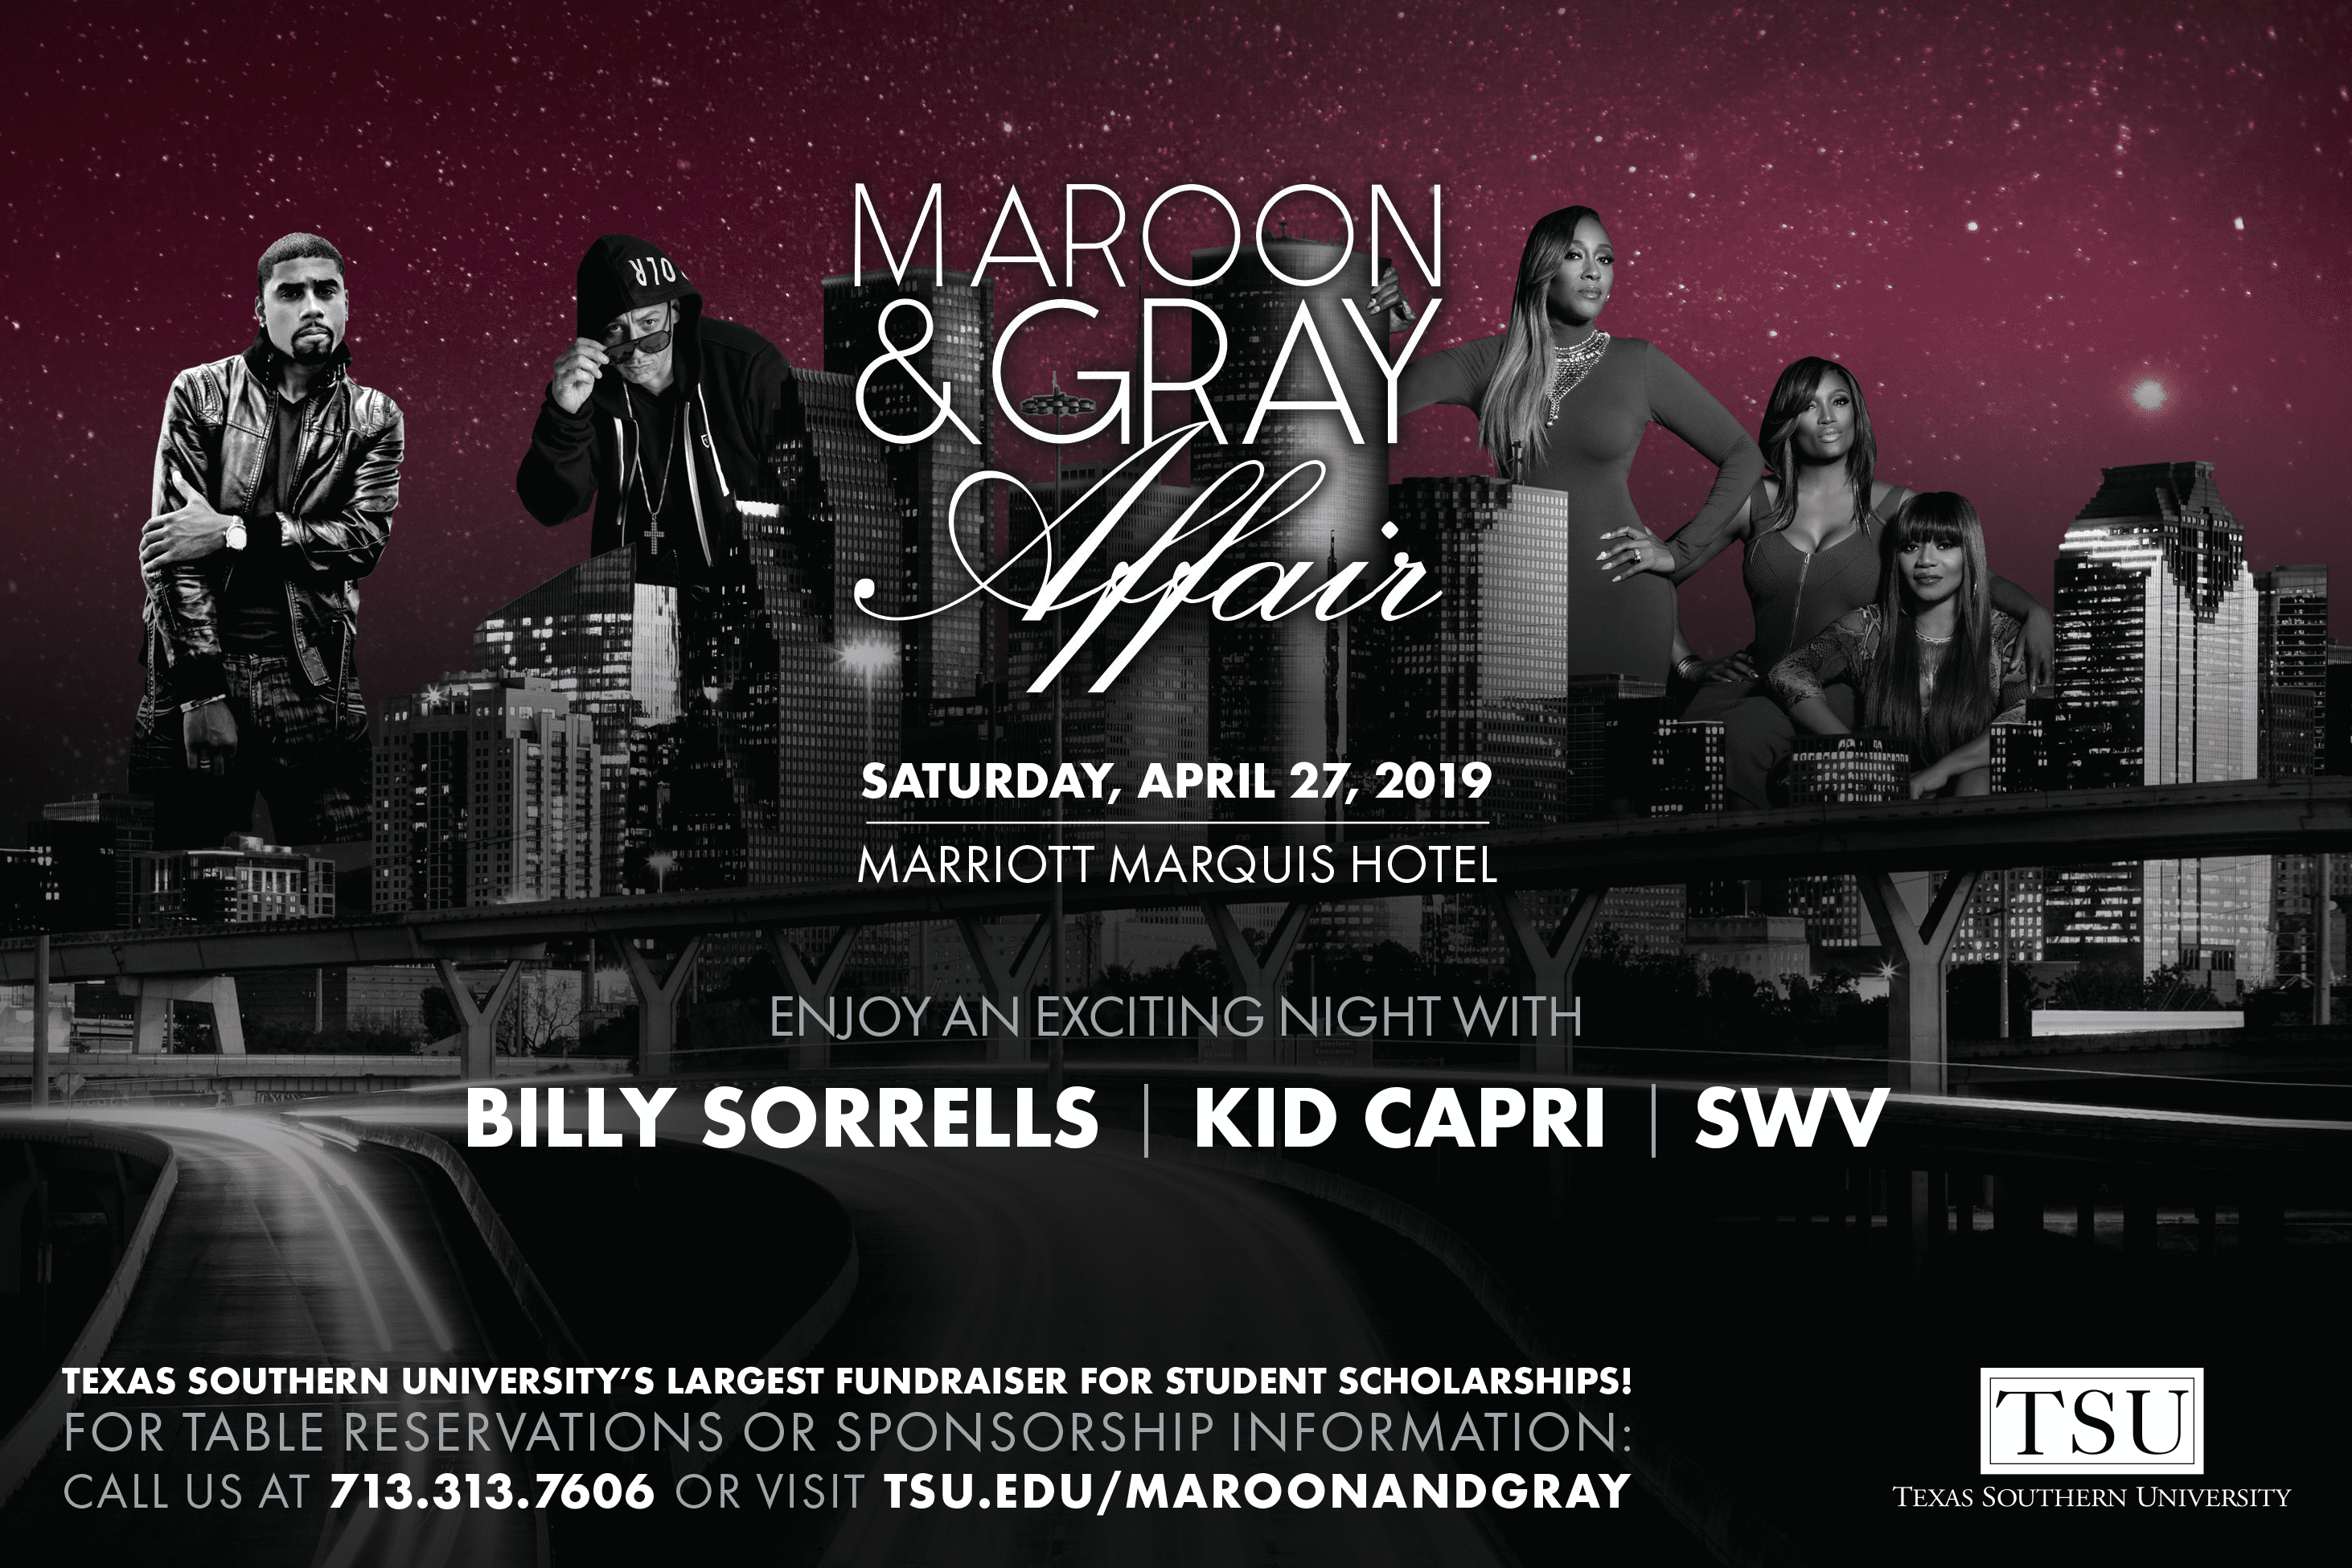 Texas Southern University presents the Maroon & Gray Affair | An exciting night with Billy Sorrells, Kid Capri and SWV | Saturday, April 27